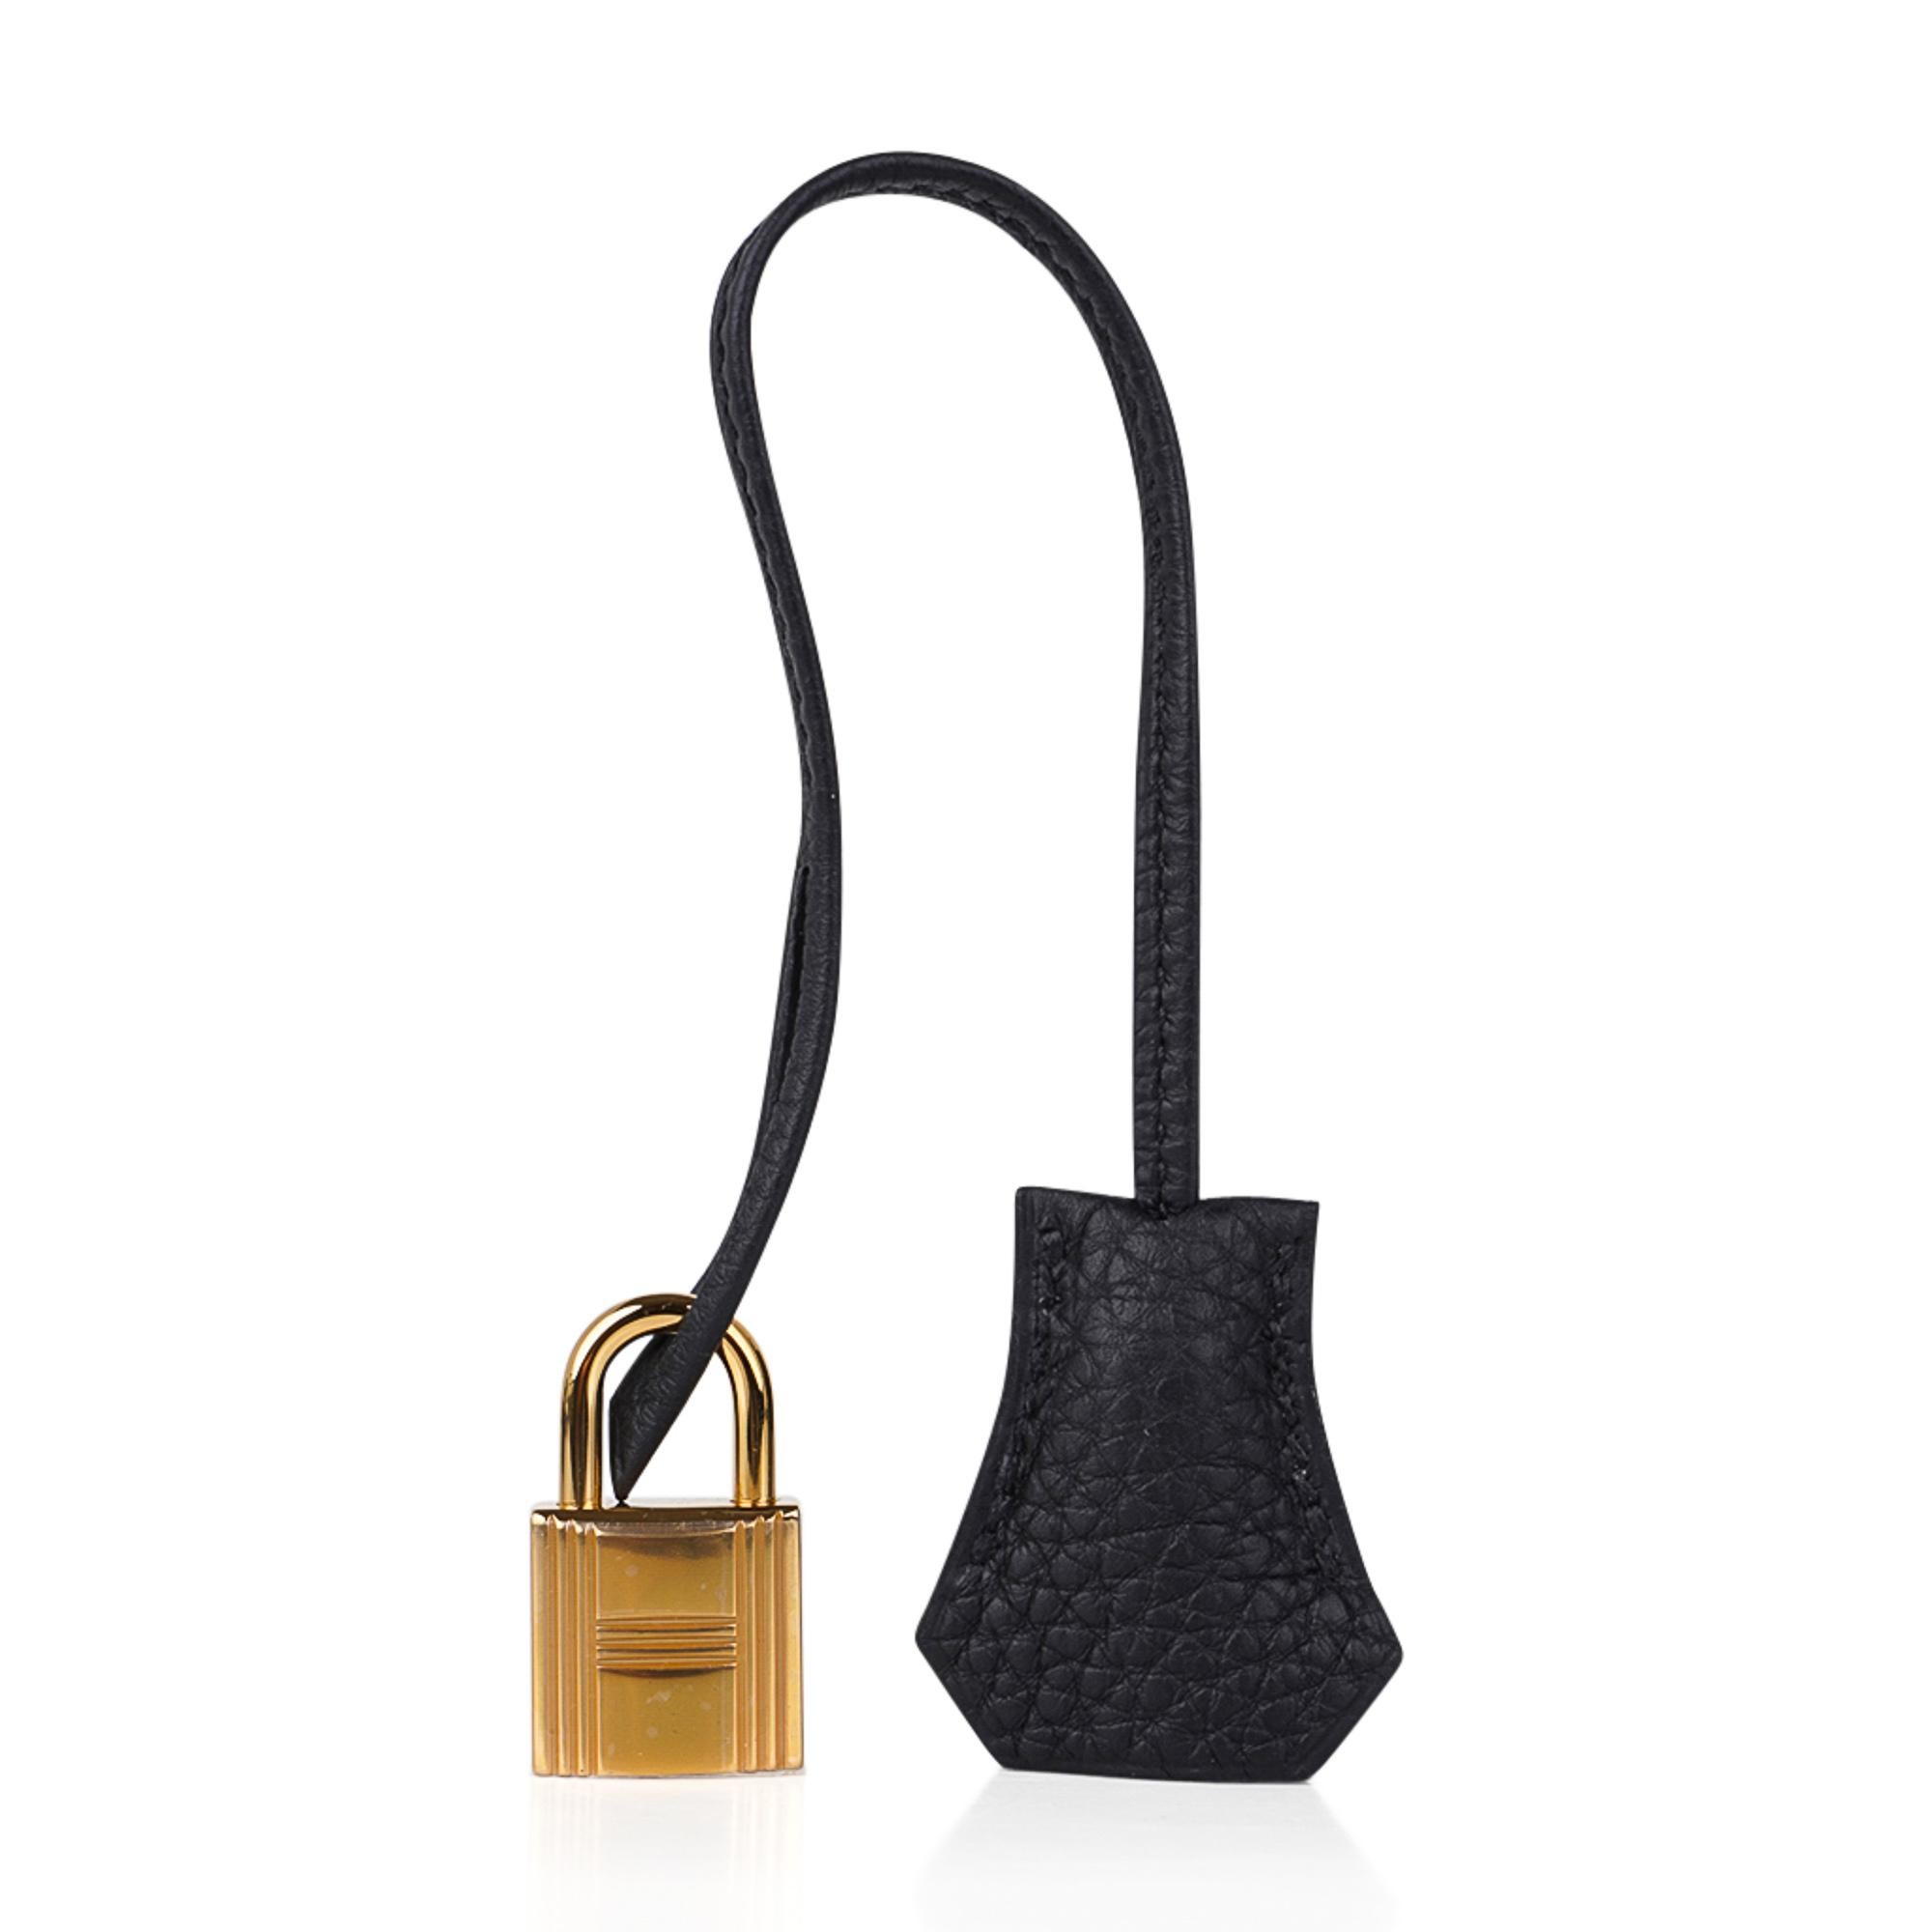 Mightychic offers a guaranteed authentic Hermes Kelly Retourne 32 Black bag.
Rich and lush with Gold hardware.
Togo leather is supple and scratch resistant.
This beauty is sure to become your ultimate go to bag!
Comes with strap, sleepers, lock,